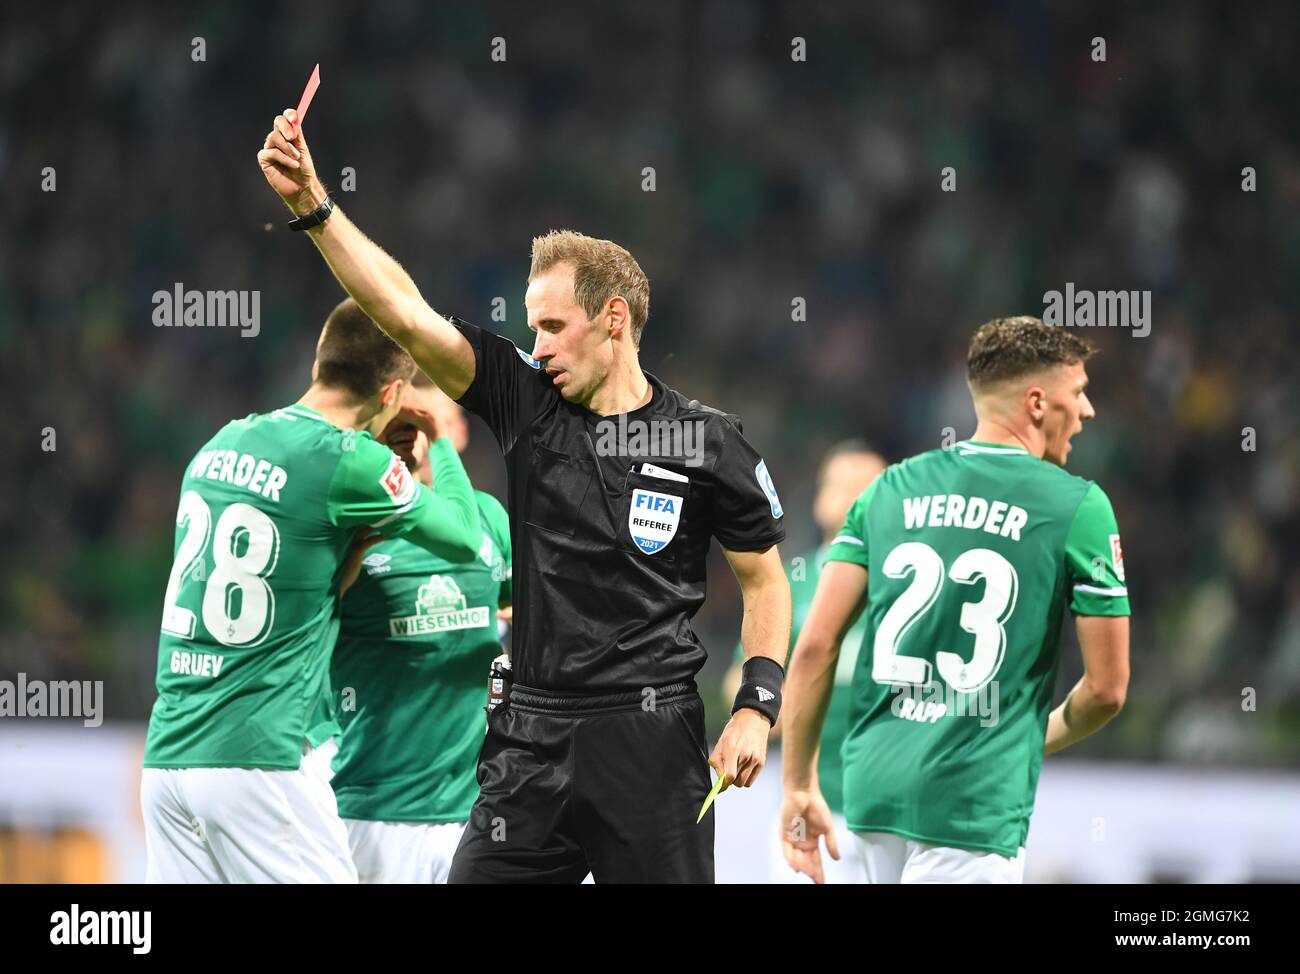 Bremen, Germany. 18th Sep, 2021. Football: 2. Bundesliga, Werder Bremen - Hamburger SV, Matchday 7, wohninvest Weserstadion. Referee Sascha Stegemann shows Hamburg captain Sebastian Schonlau (not in picture) the red card. Credit: Carmen Jaspersen/dpa - IMPORTANT NOTE: In accordance with the regulations of the DFL Deutsche Fußball Liga and/or the DFB Deutscher Fußball-Bund, it is prohibited to use or have used photographs taken in the stadium and/or of the match in the form of sequence pictures and/or video-like photo series./dpa/Alamy Live News Stock Photo